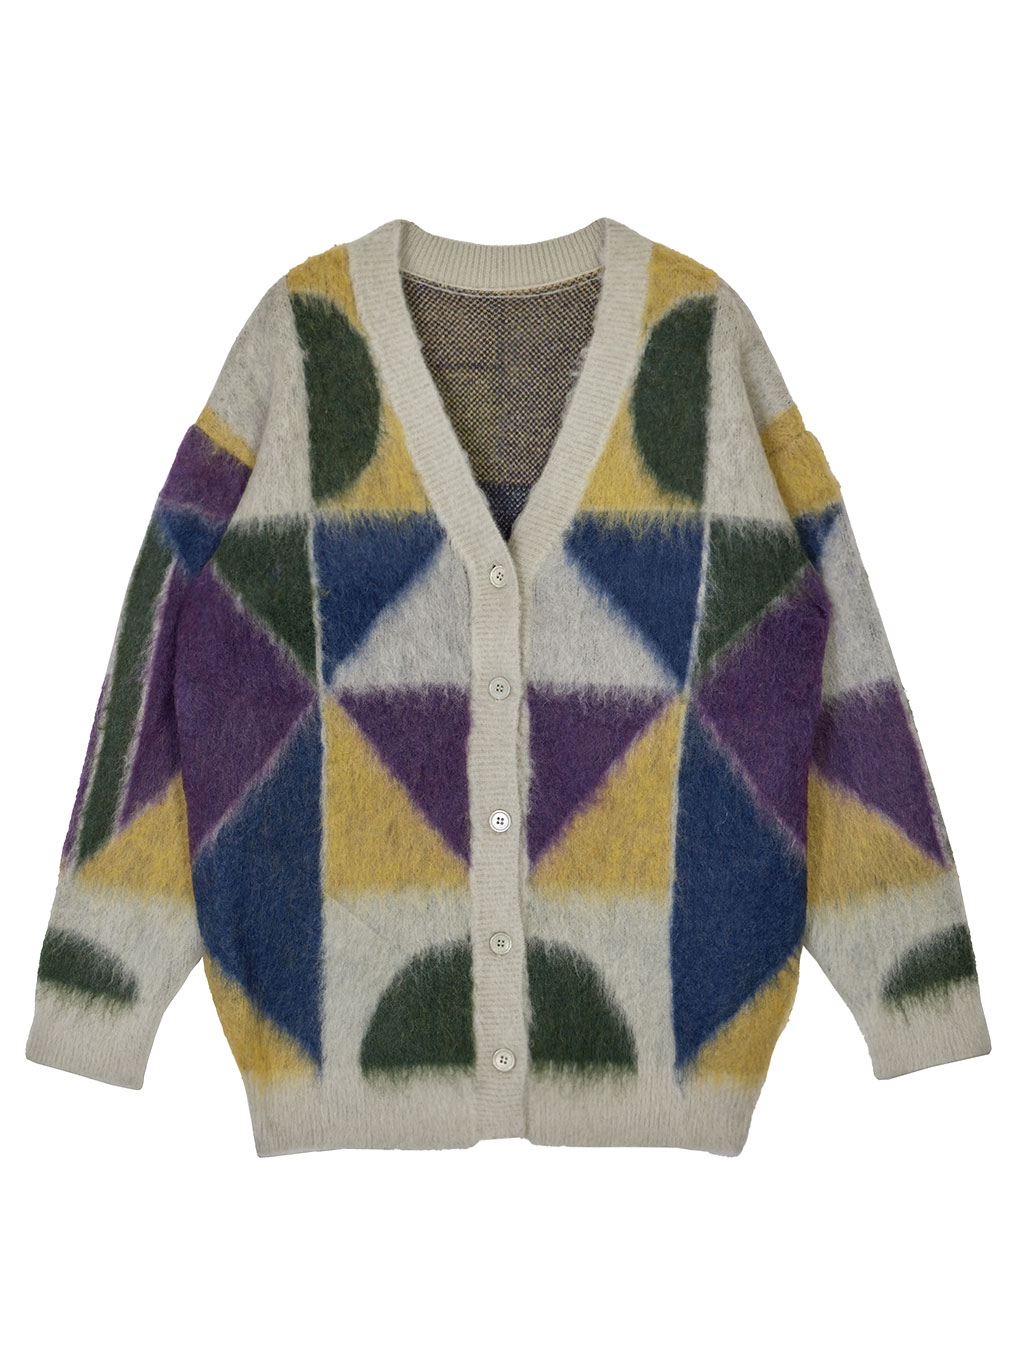 Ameri VINTAGE(アメリ ヴィンテージ)直営通販サイト / COLOR BLOCK OVER KNIT CARDIGAN